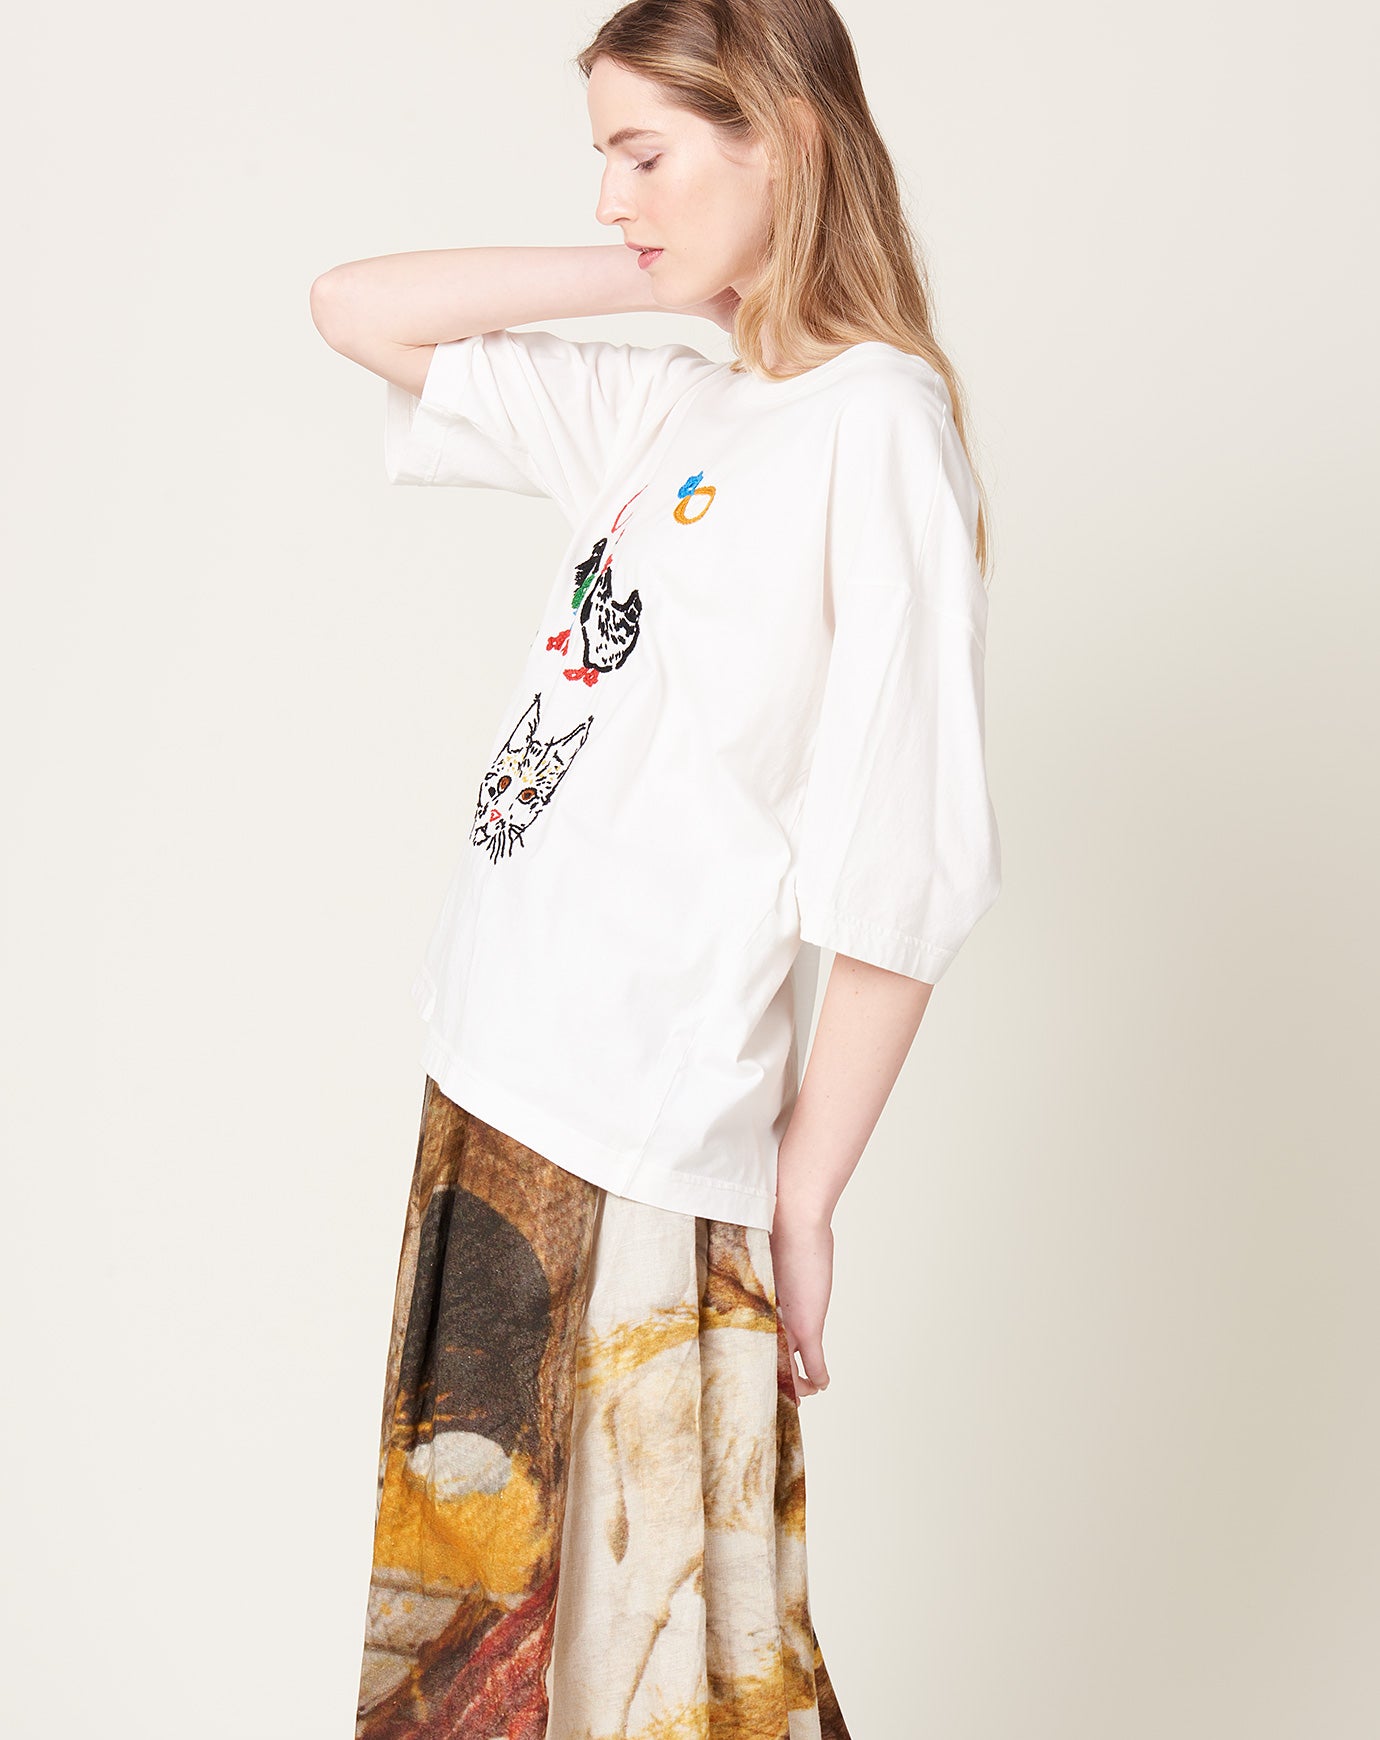 Anntian Hand Embroidered Animals Classic T-Shirt